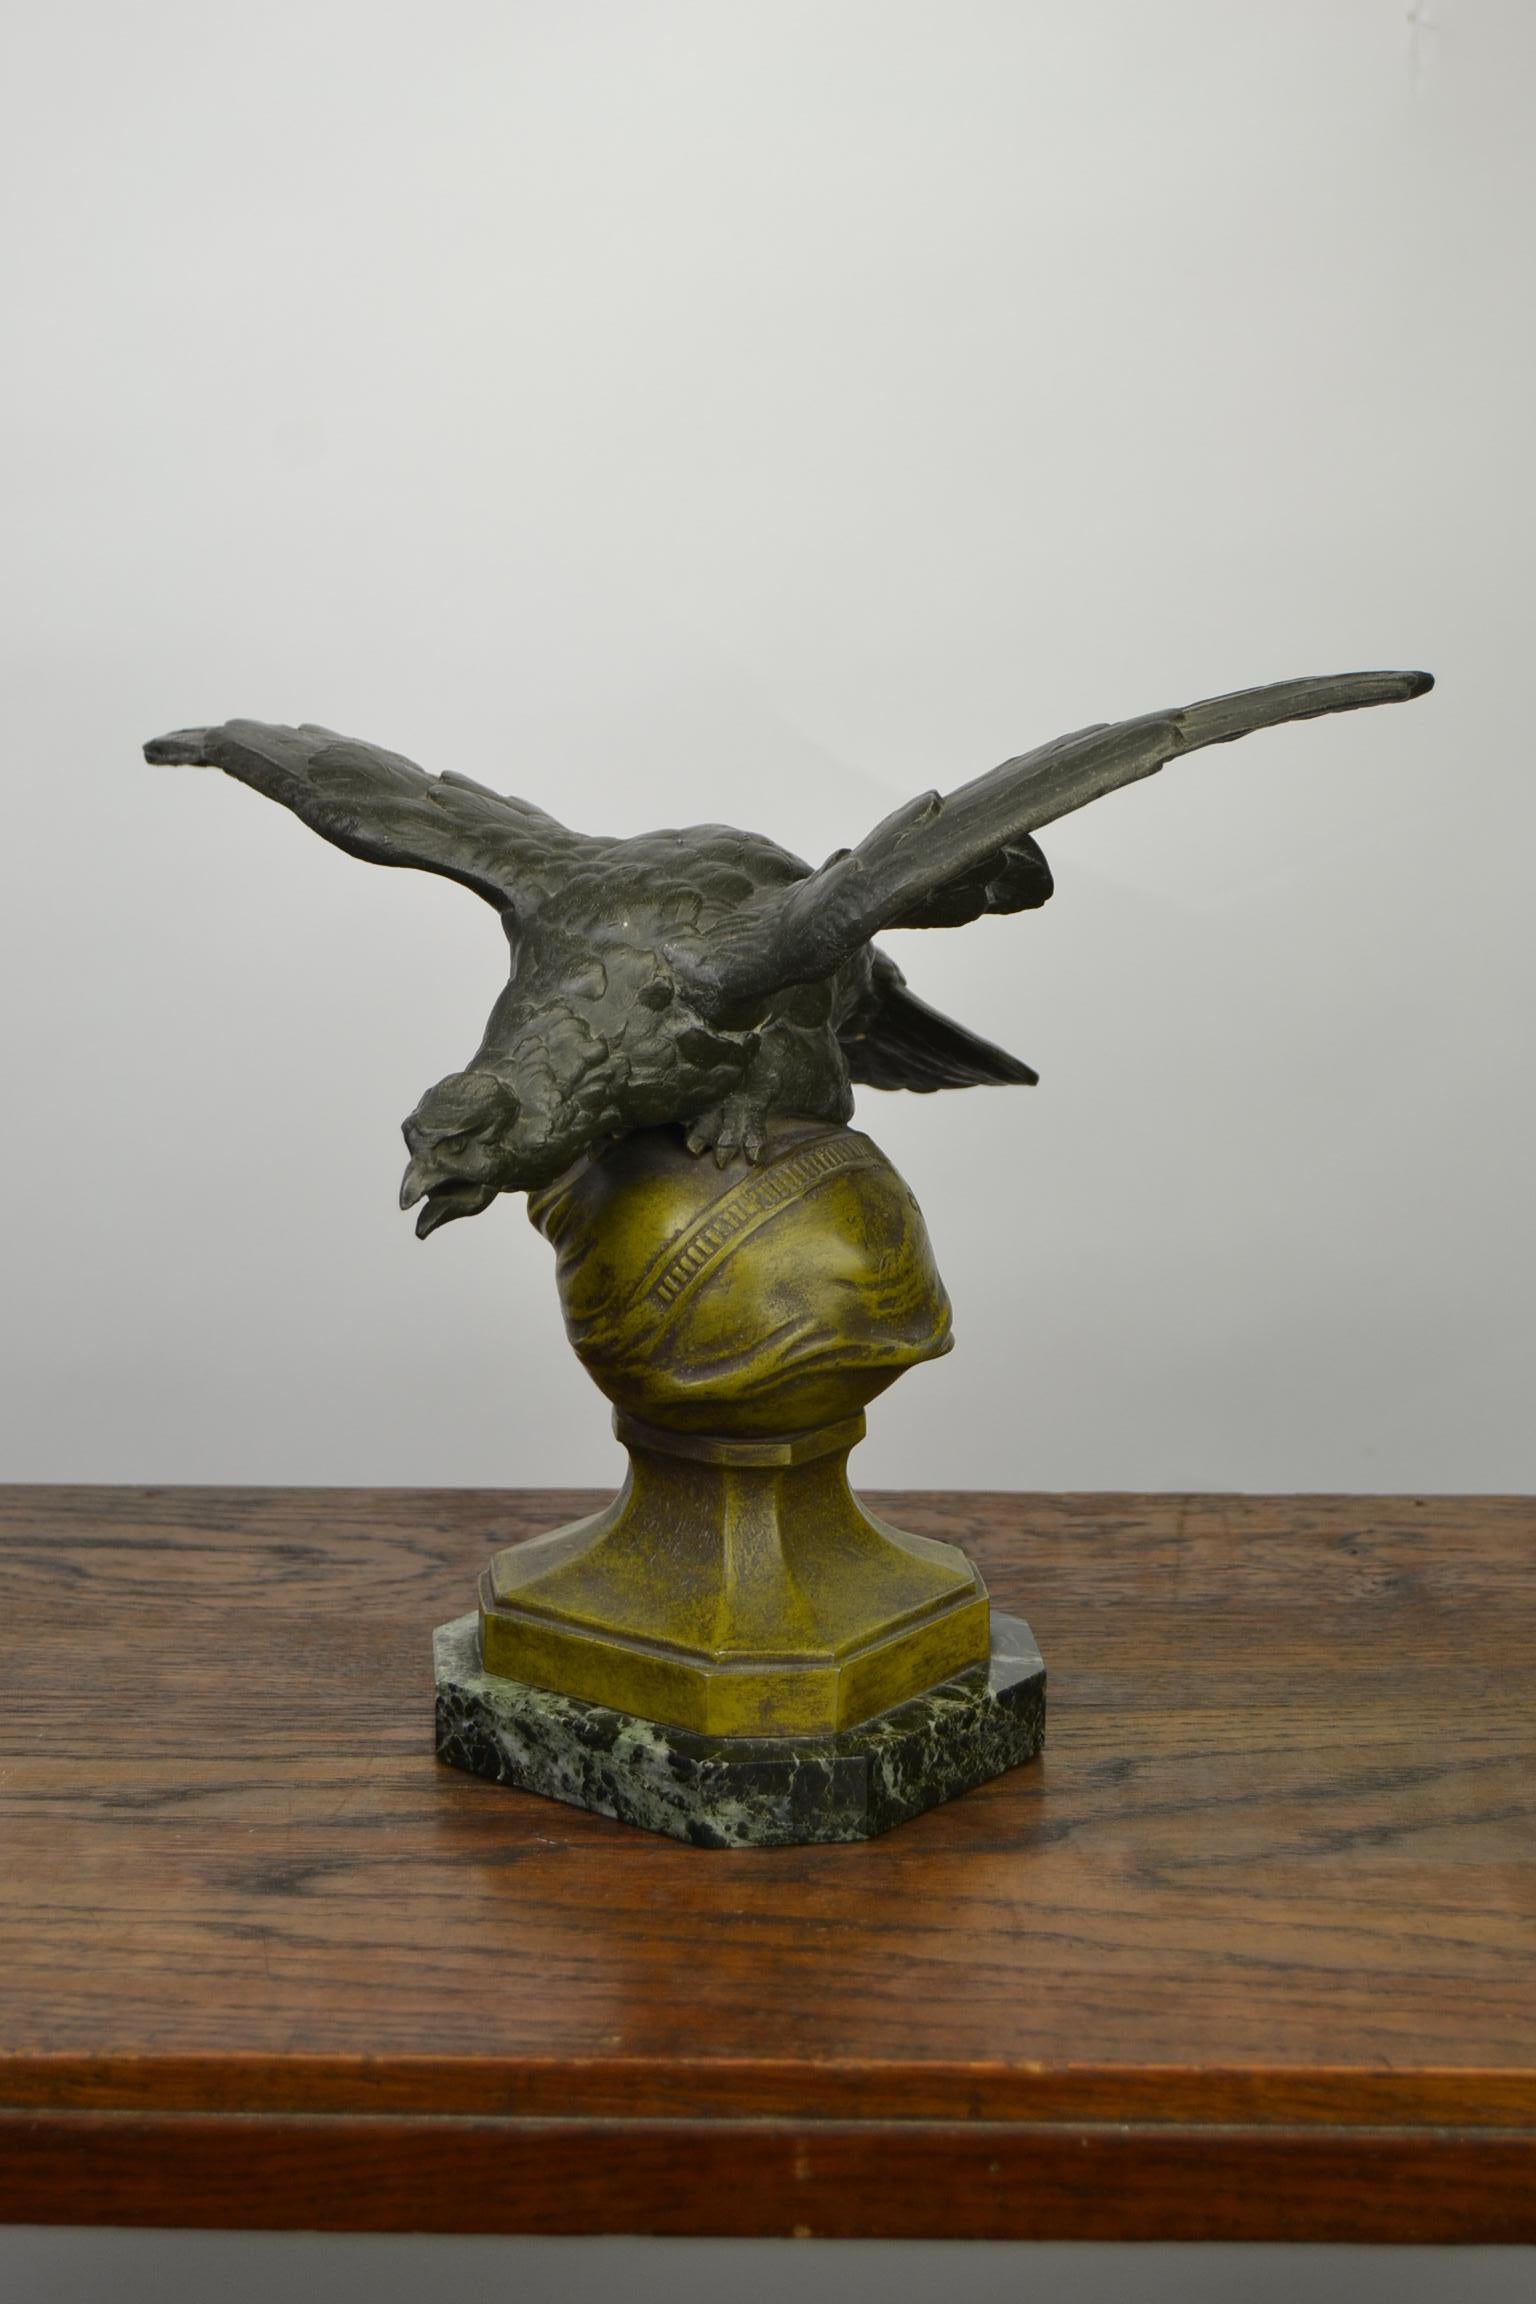 French Art Deco - Art Nouveau Sculpture - Statue - Desk Ornament by Charles Théodore Perron (1862-1934), France. 
The Eagle has spread Wings and an open mouth and is very detailed. 
Green with black marble base, bronze globe and a green - black